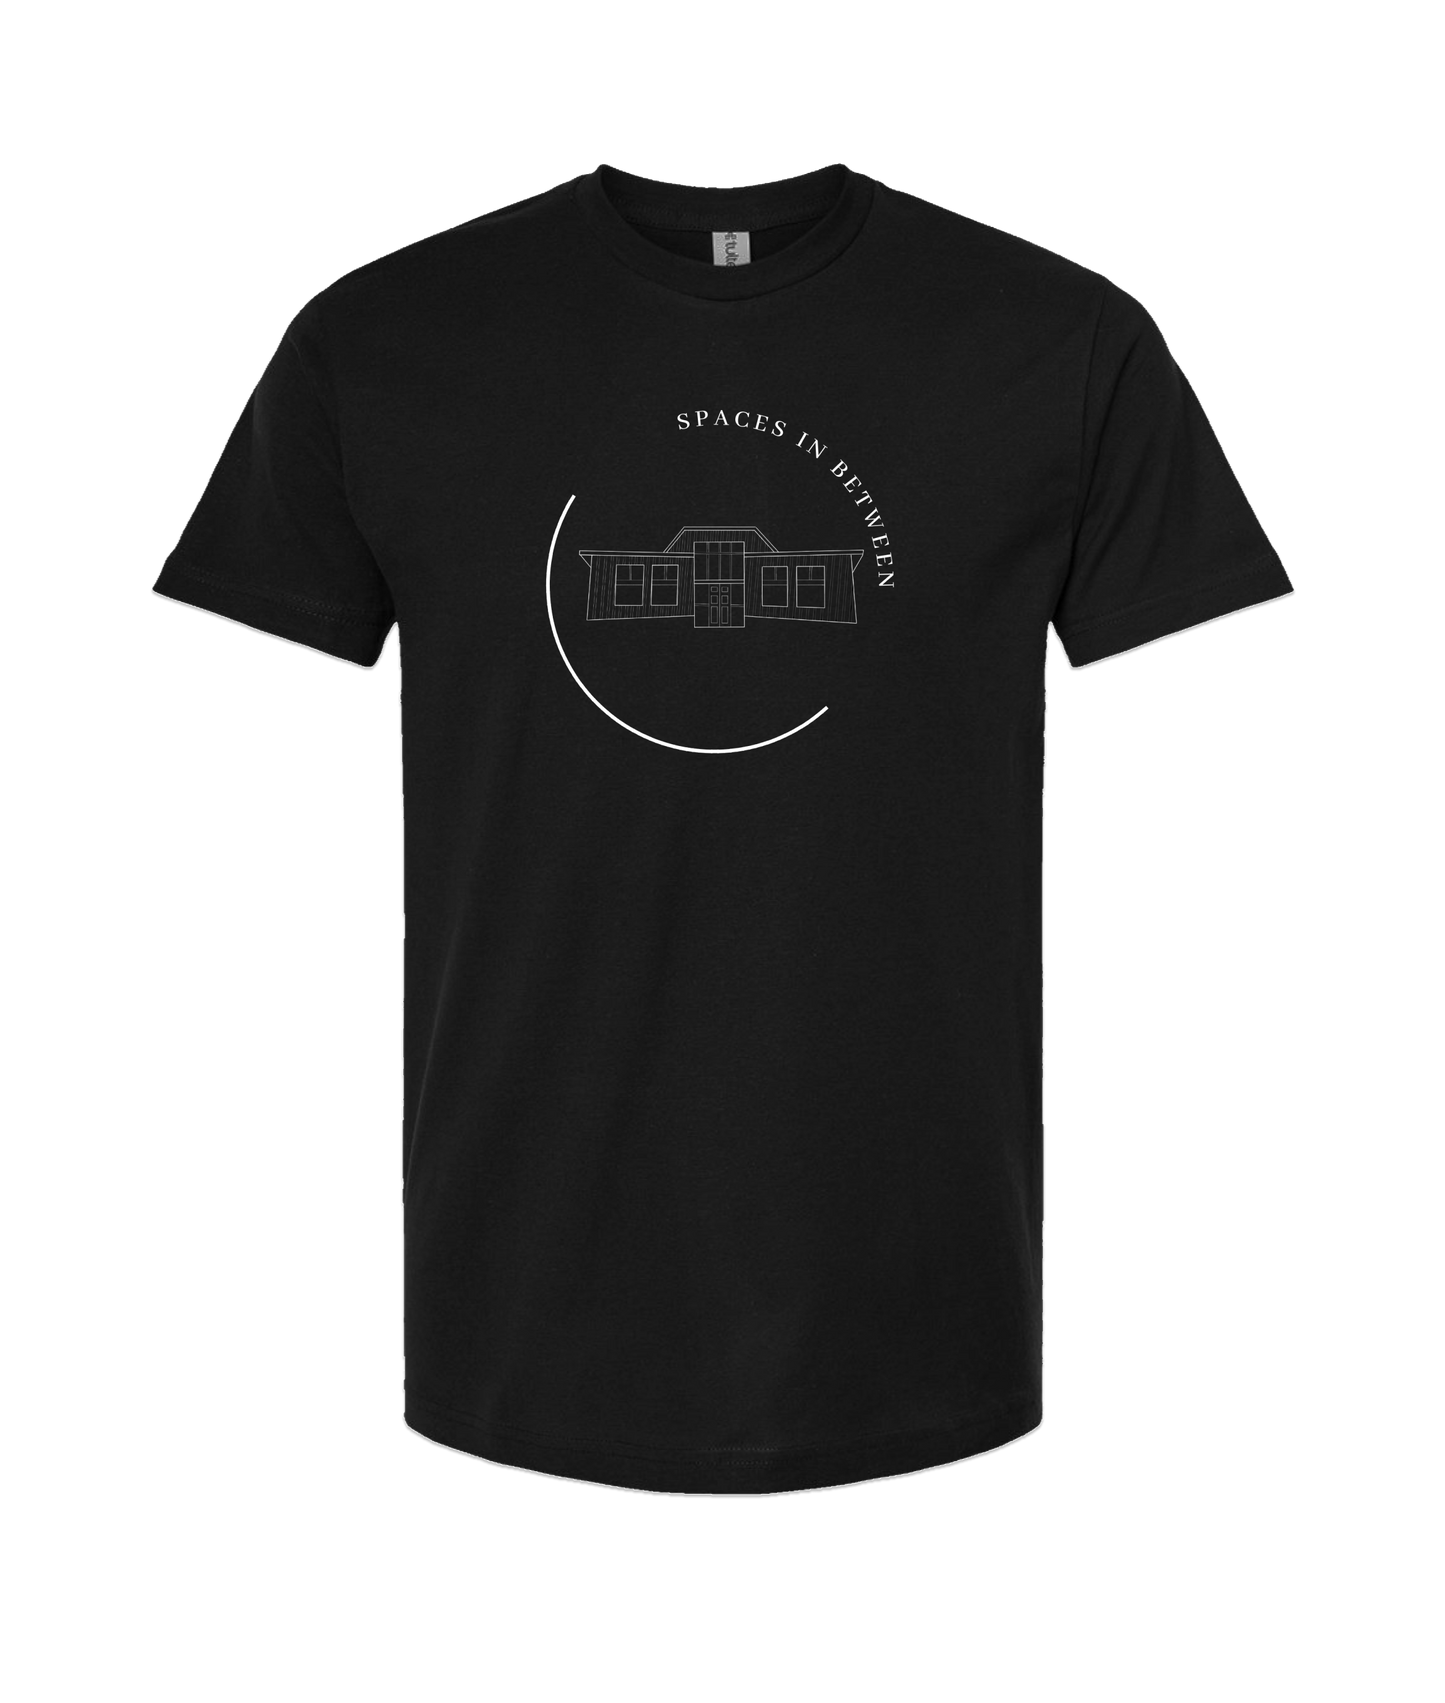 Spaces In Between - House - Black T Shirt